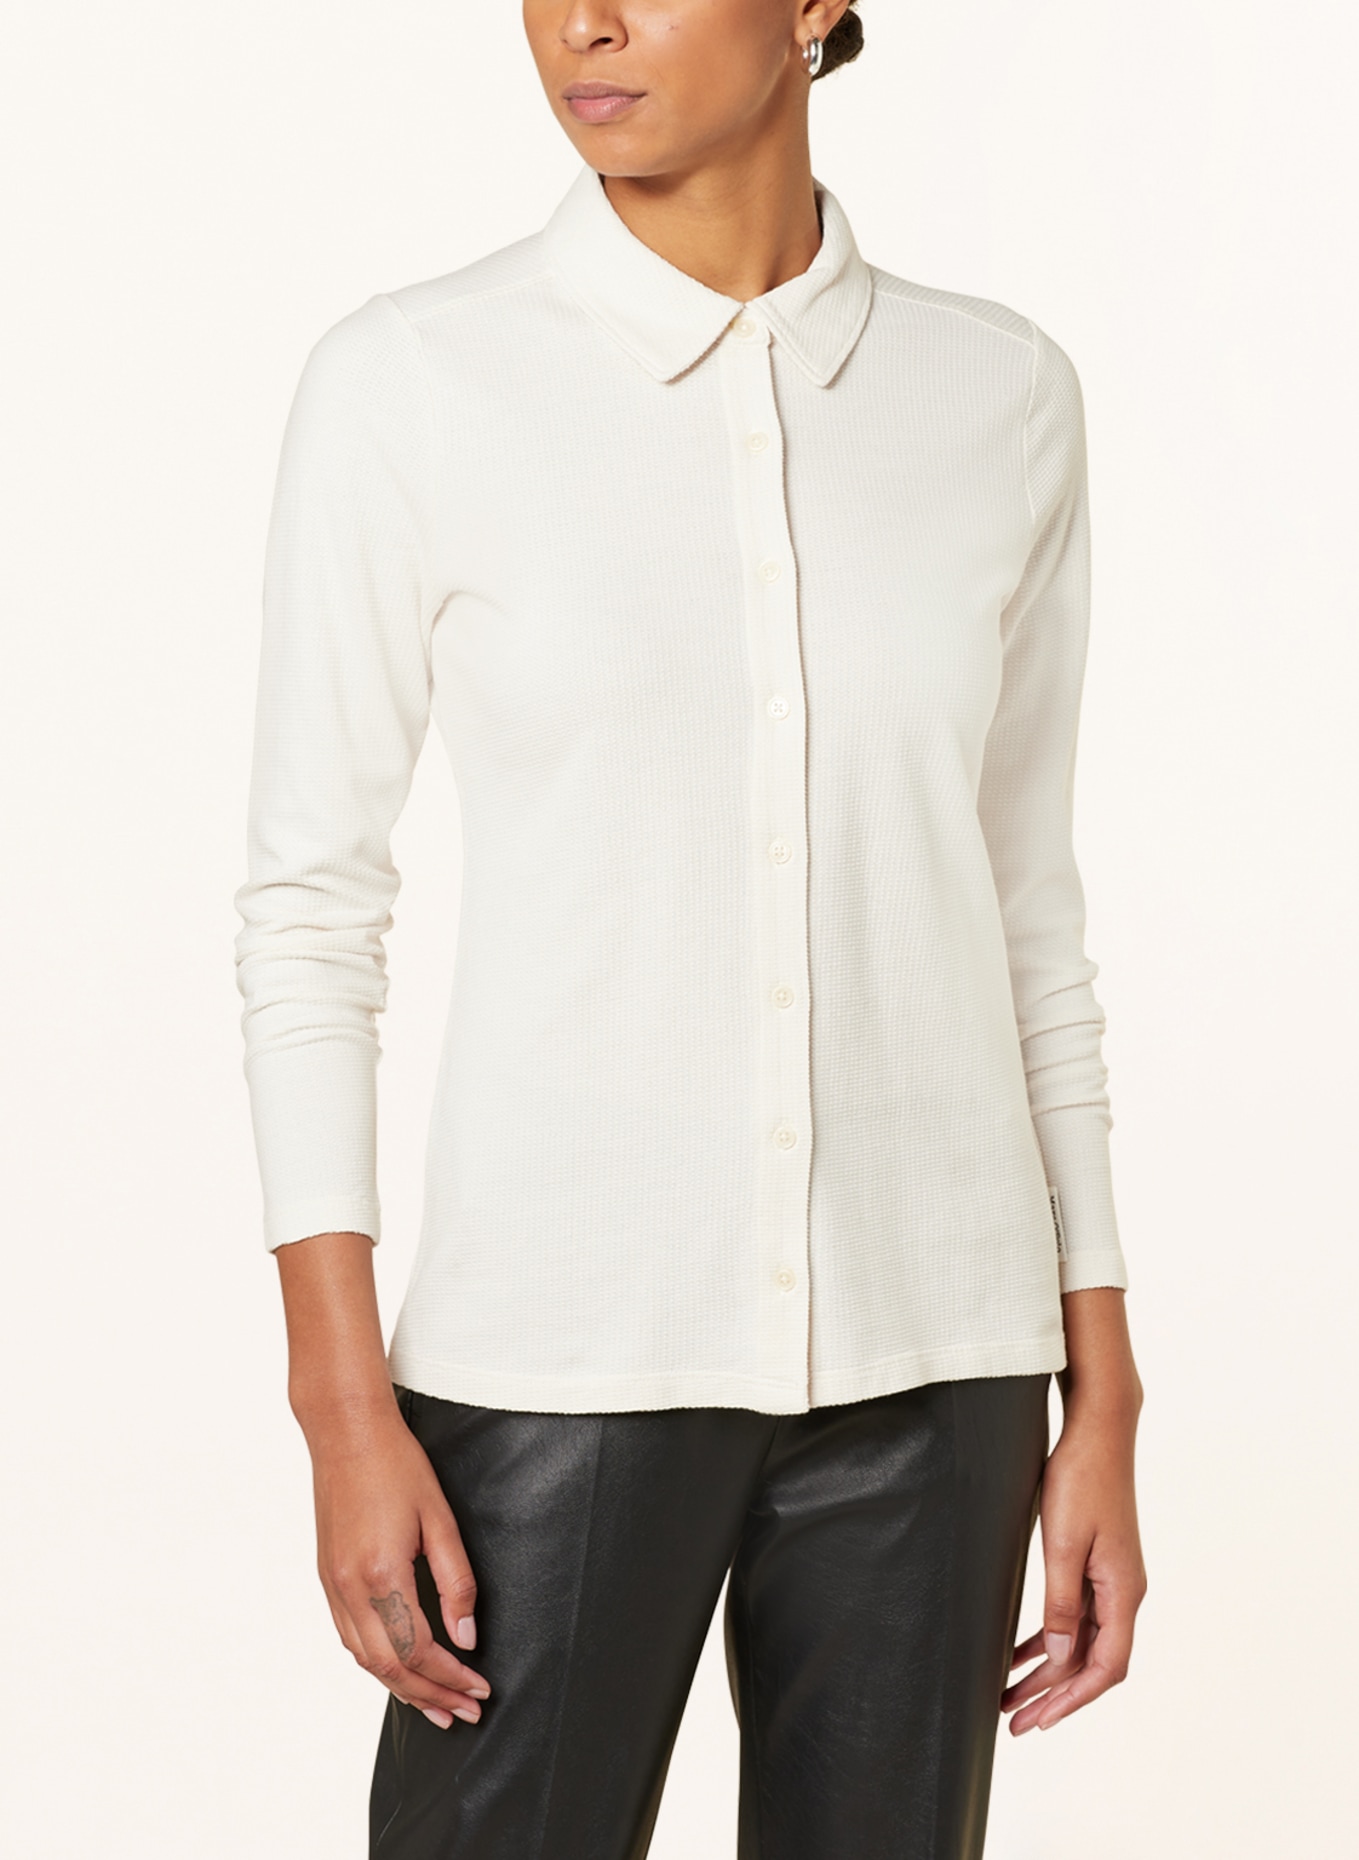 Marc O'Polo Shirt blouse made of jersey, Color: ECRU (Image 4)